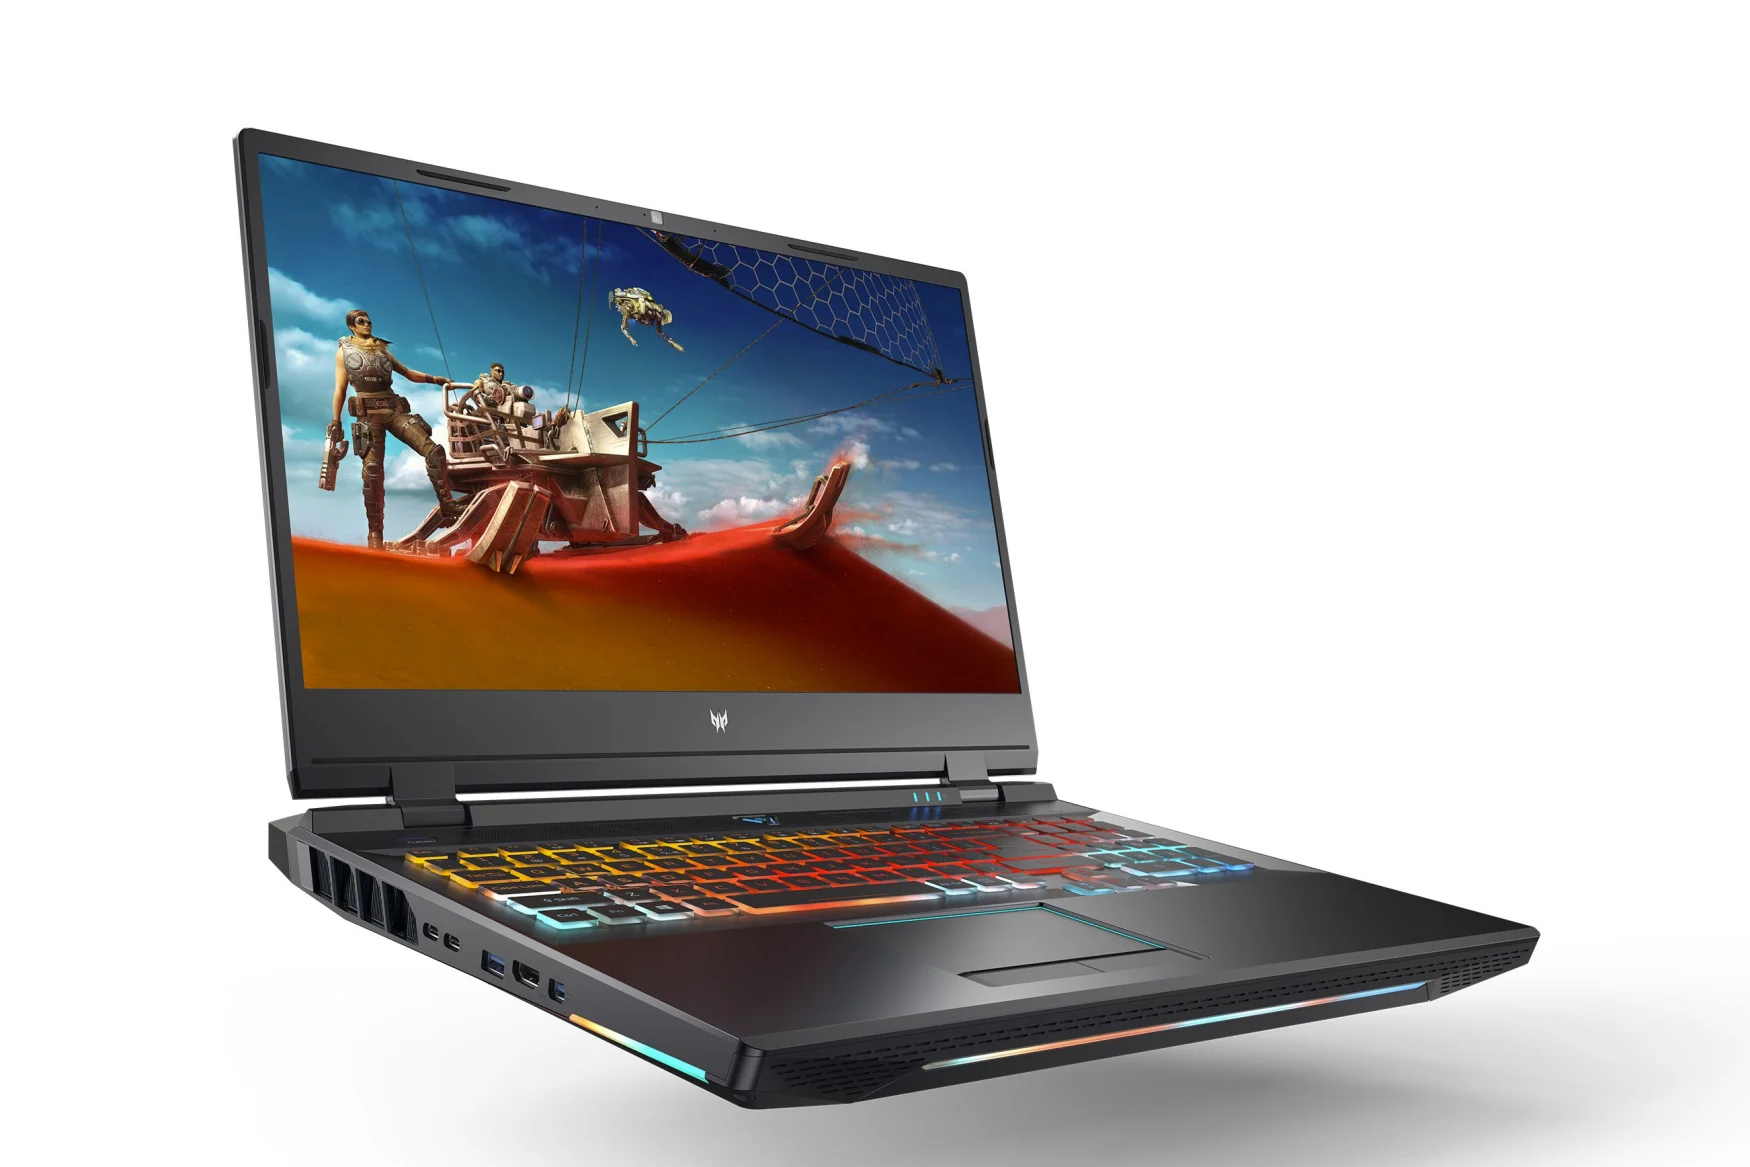 Promotional image of Acer's Predator Helios 500